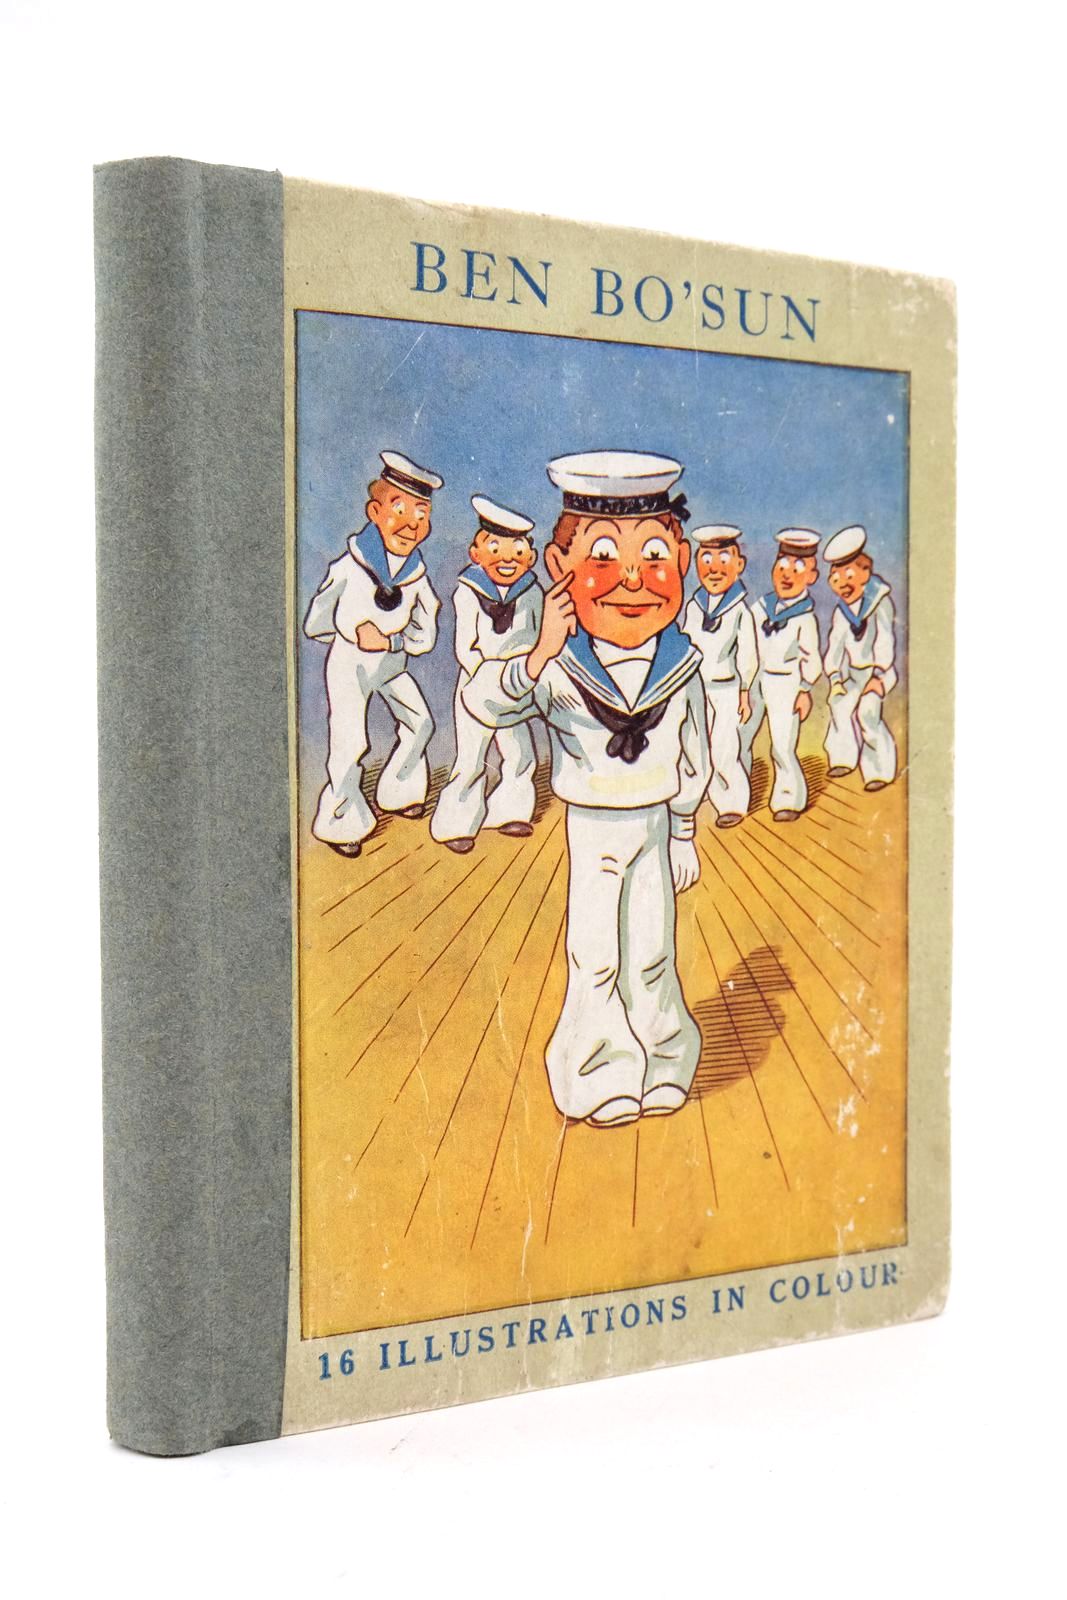 Photo of BEN BO'SUN written by Golding, Harry illustrated by Shepheard, G.E. published by Ward, Lock &amp; Co. Ltd. (STOCK CODE: 2138603)  for sale by Stella & Rose's Books